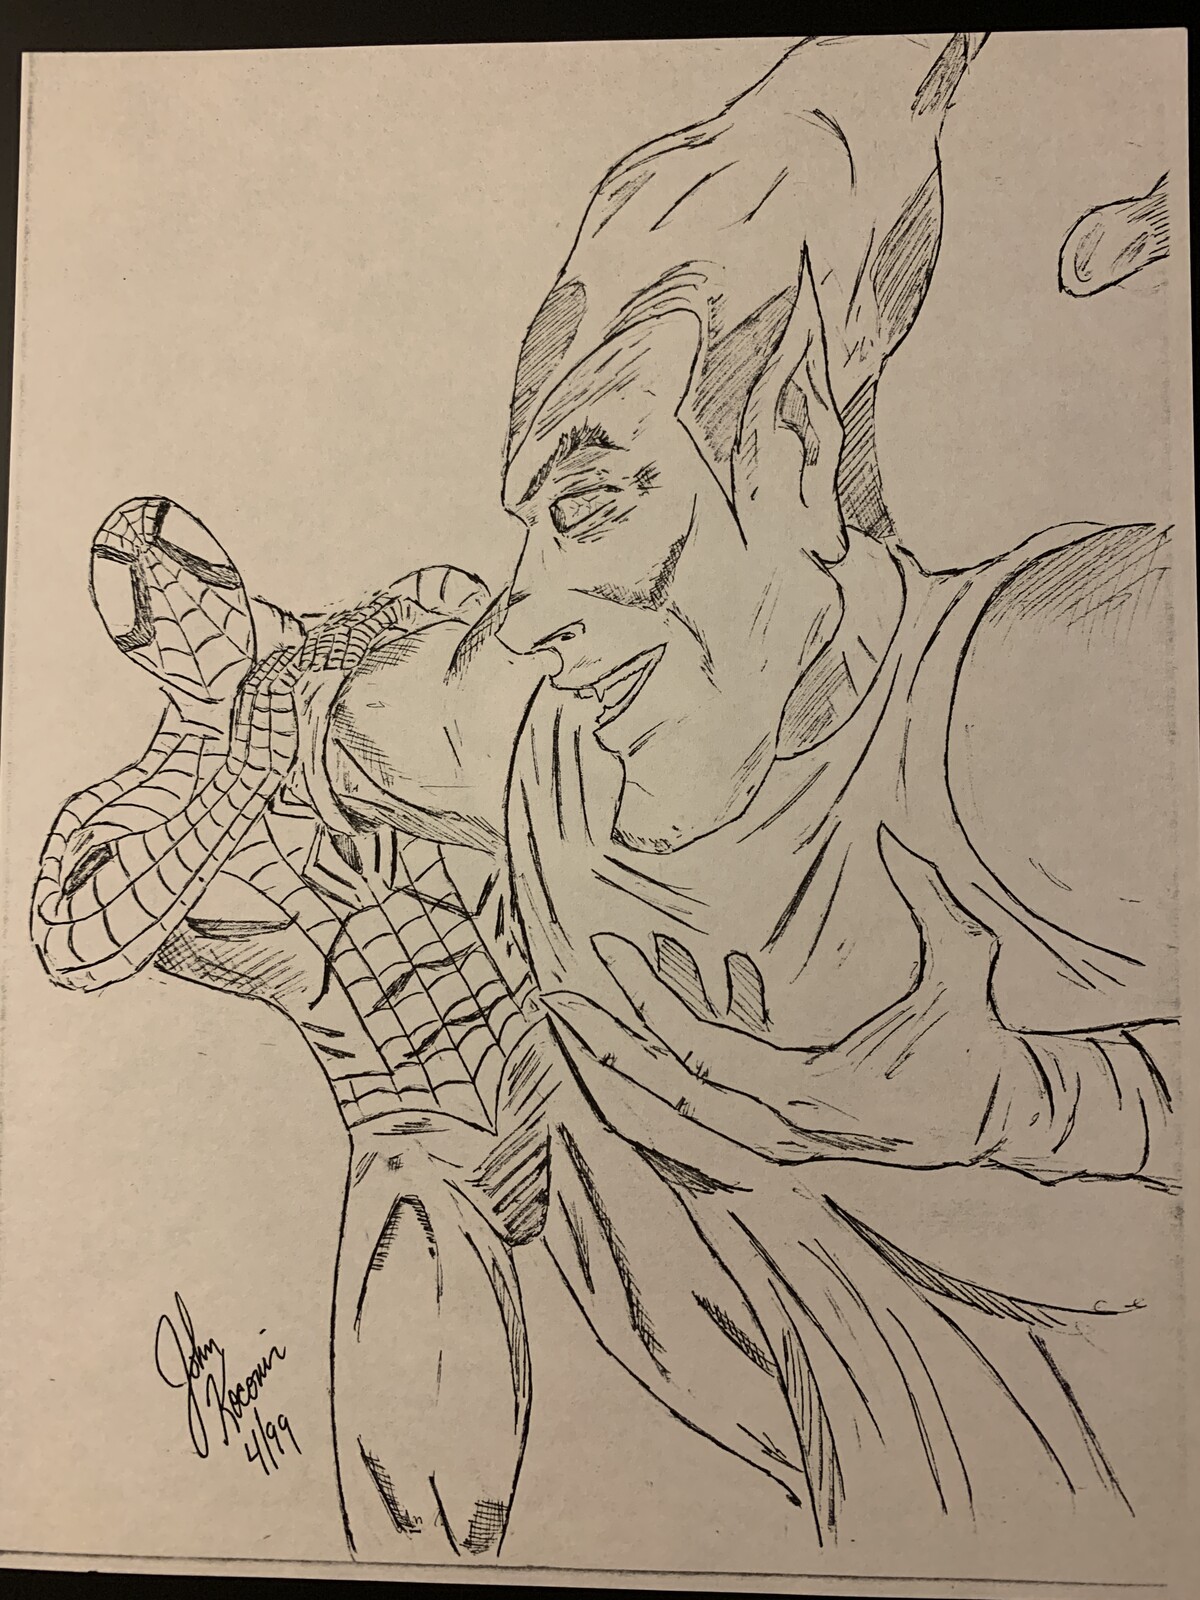 Spider-Man and Green Goblin